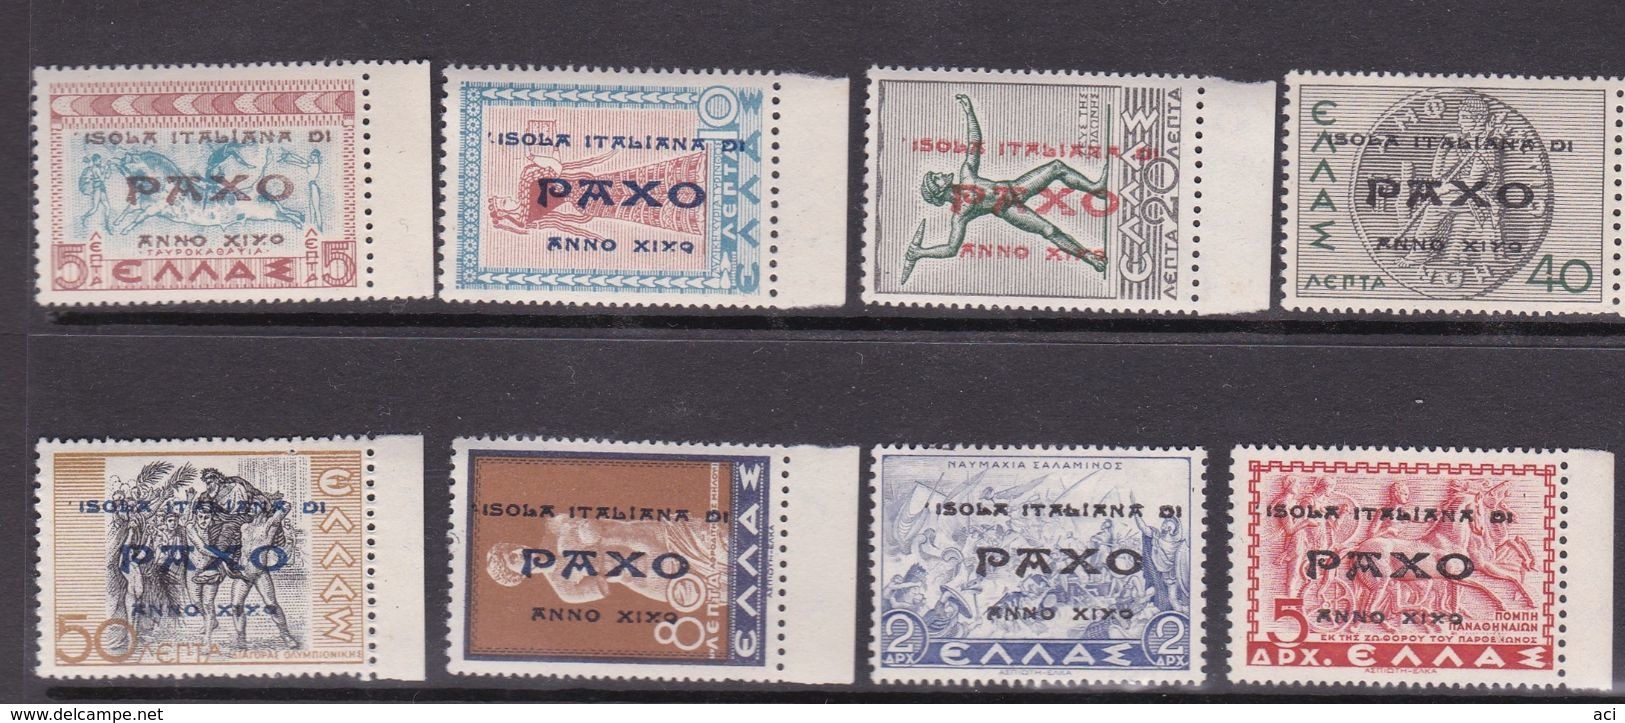 Italy-WW II Occupation-Isole Ionie, Paxos S 1-8 1942 Greek Stamps Overprinted, MNH - Islas Jónicas